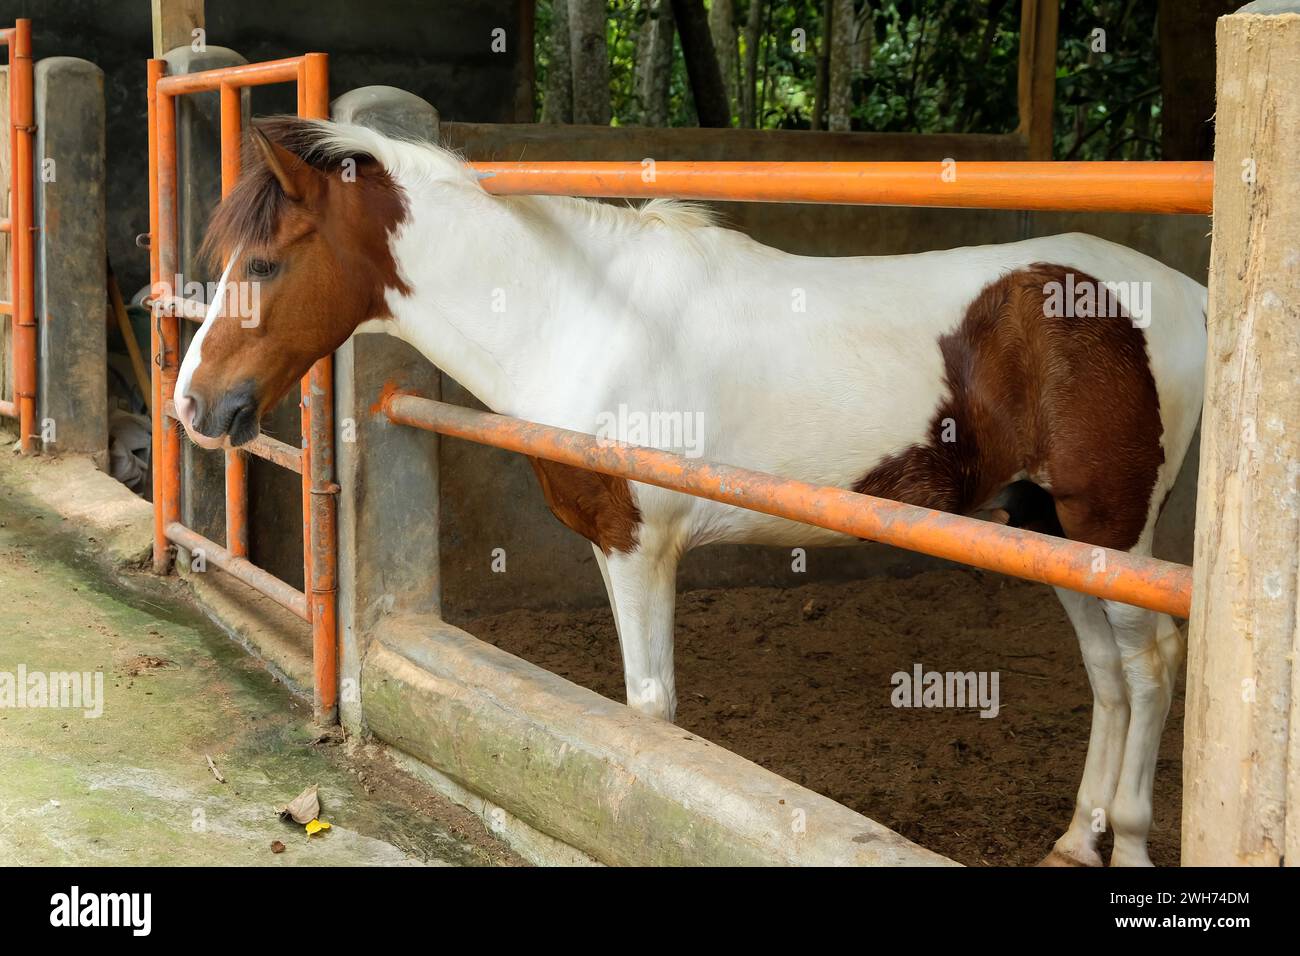 Beautiful purebred horse at the stable door. Foal at the stable door. Horse ranch. Stock Photo